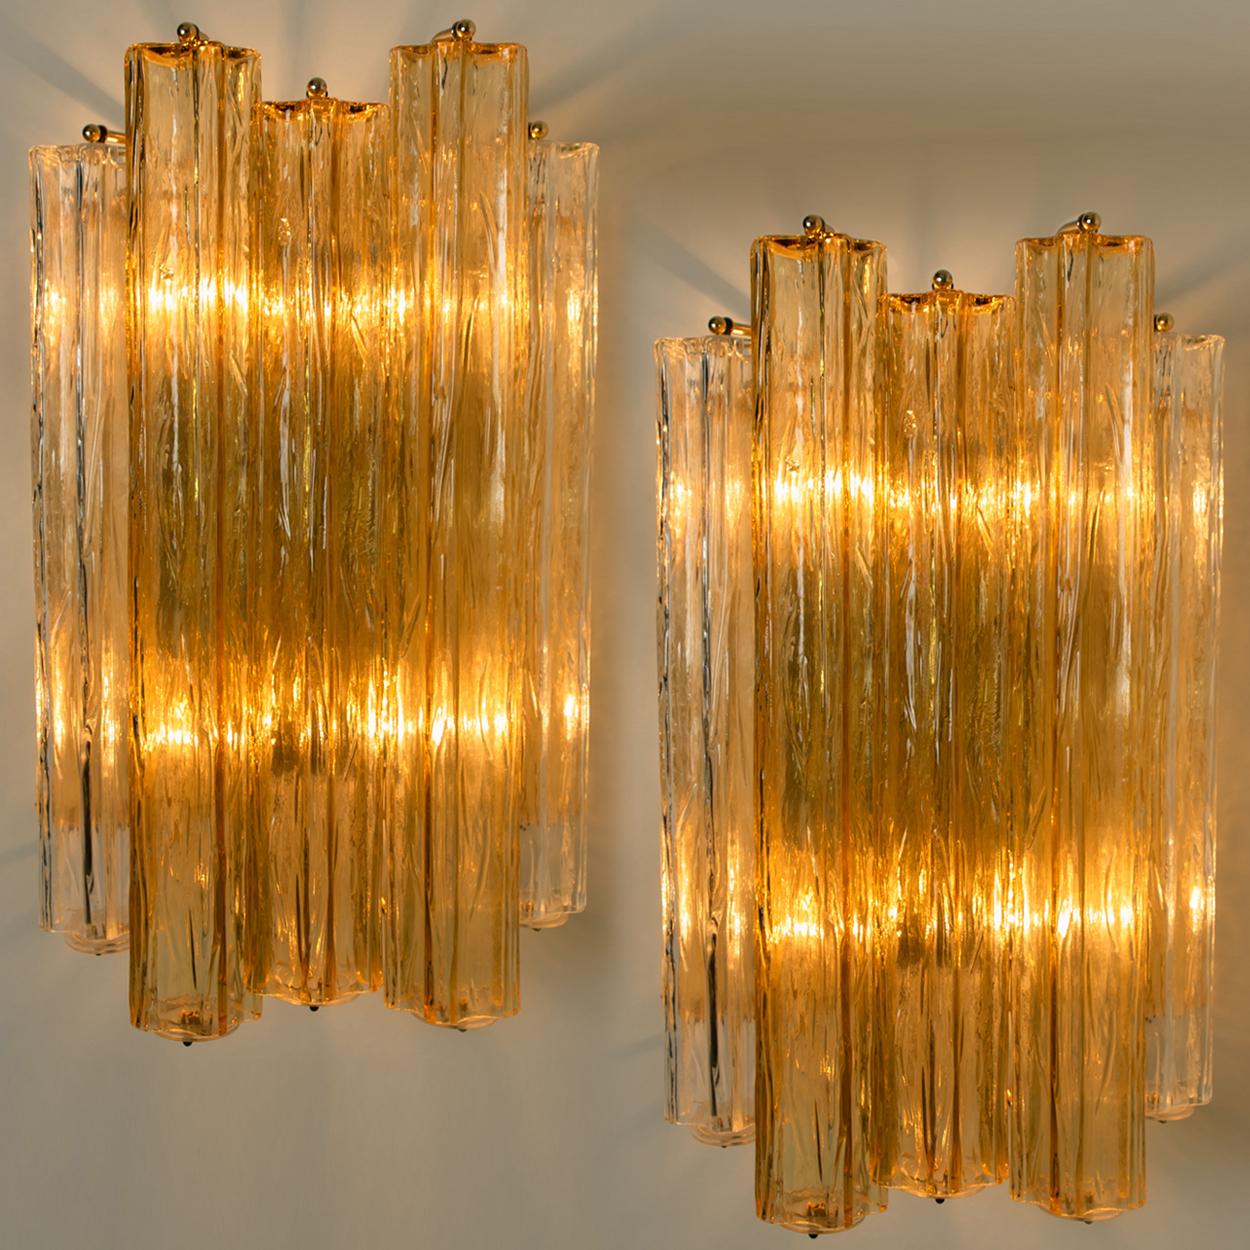 20th Century 1 of the 4 Extra Large Wall Sconces or Wall Lights Murano Glass, Barovier & Toso